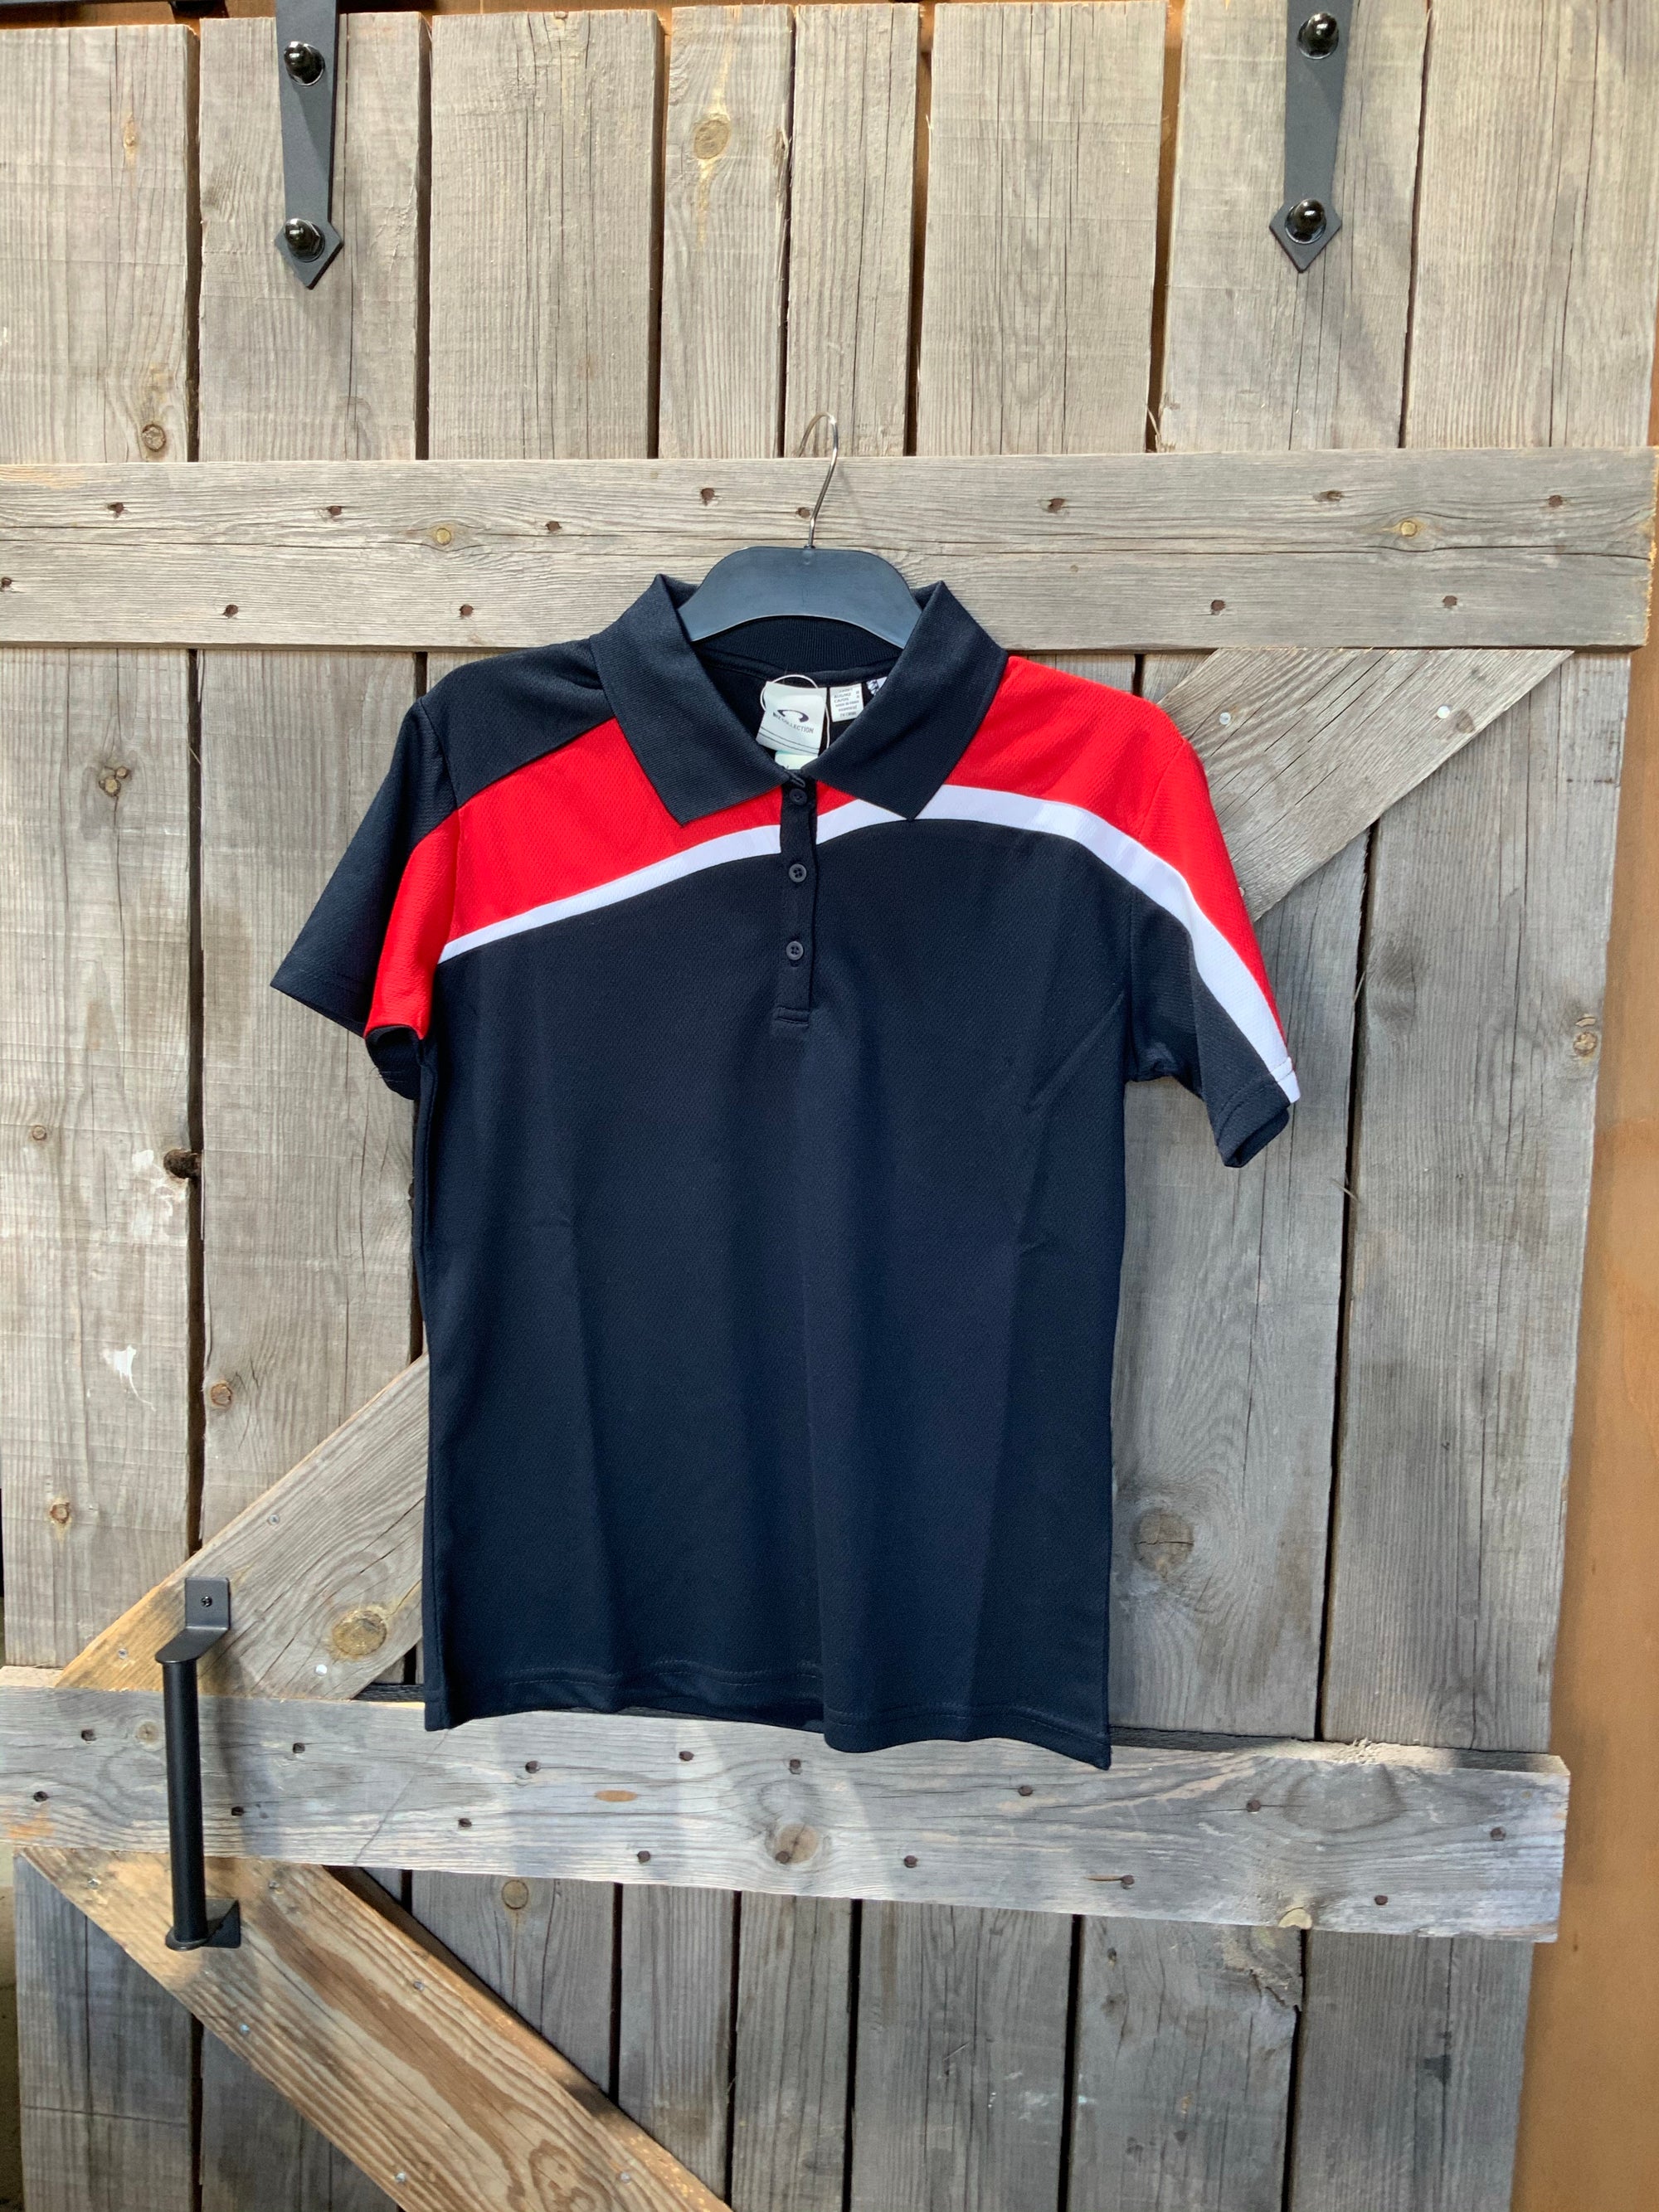 Biz collection ladies navy and red polo size 8